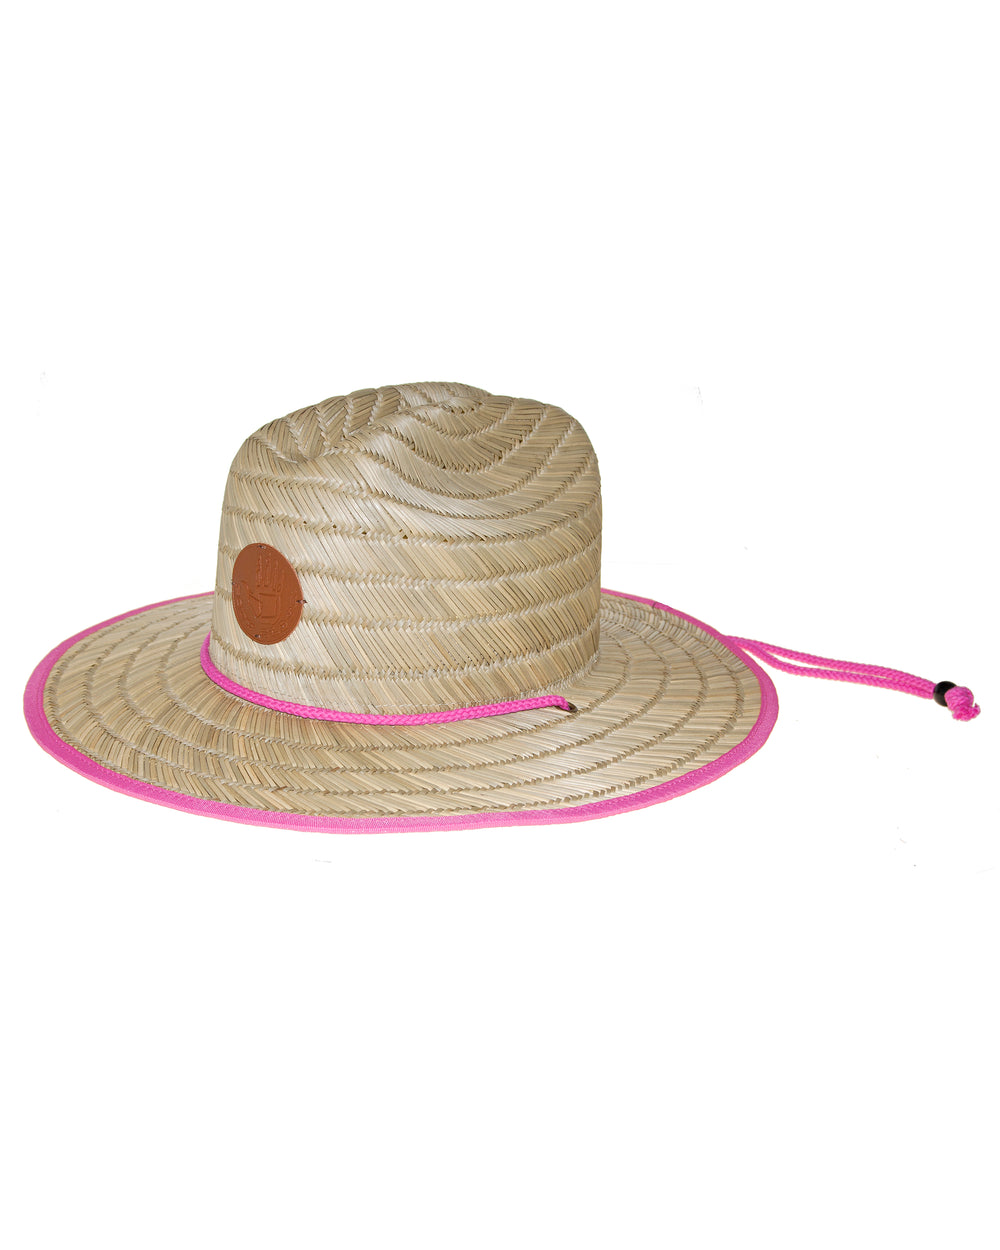 Straw Lifeguard Hat with Bungee Cord - Natural/Pink